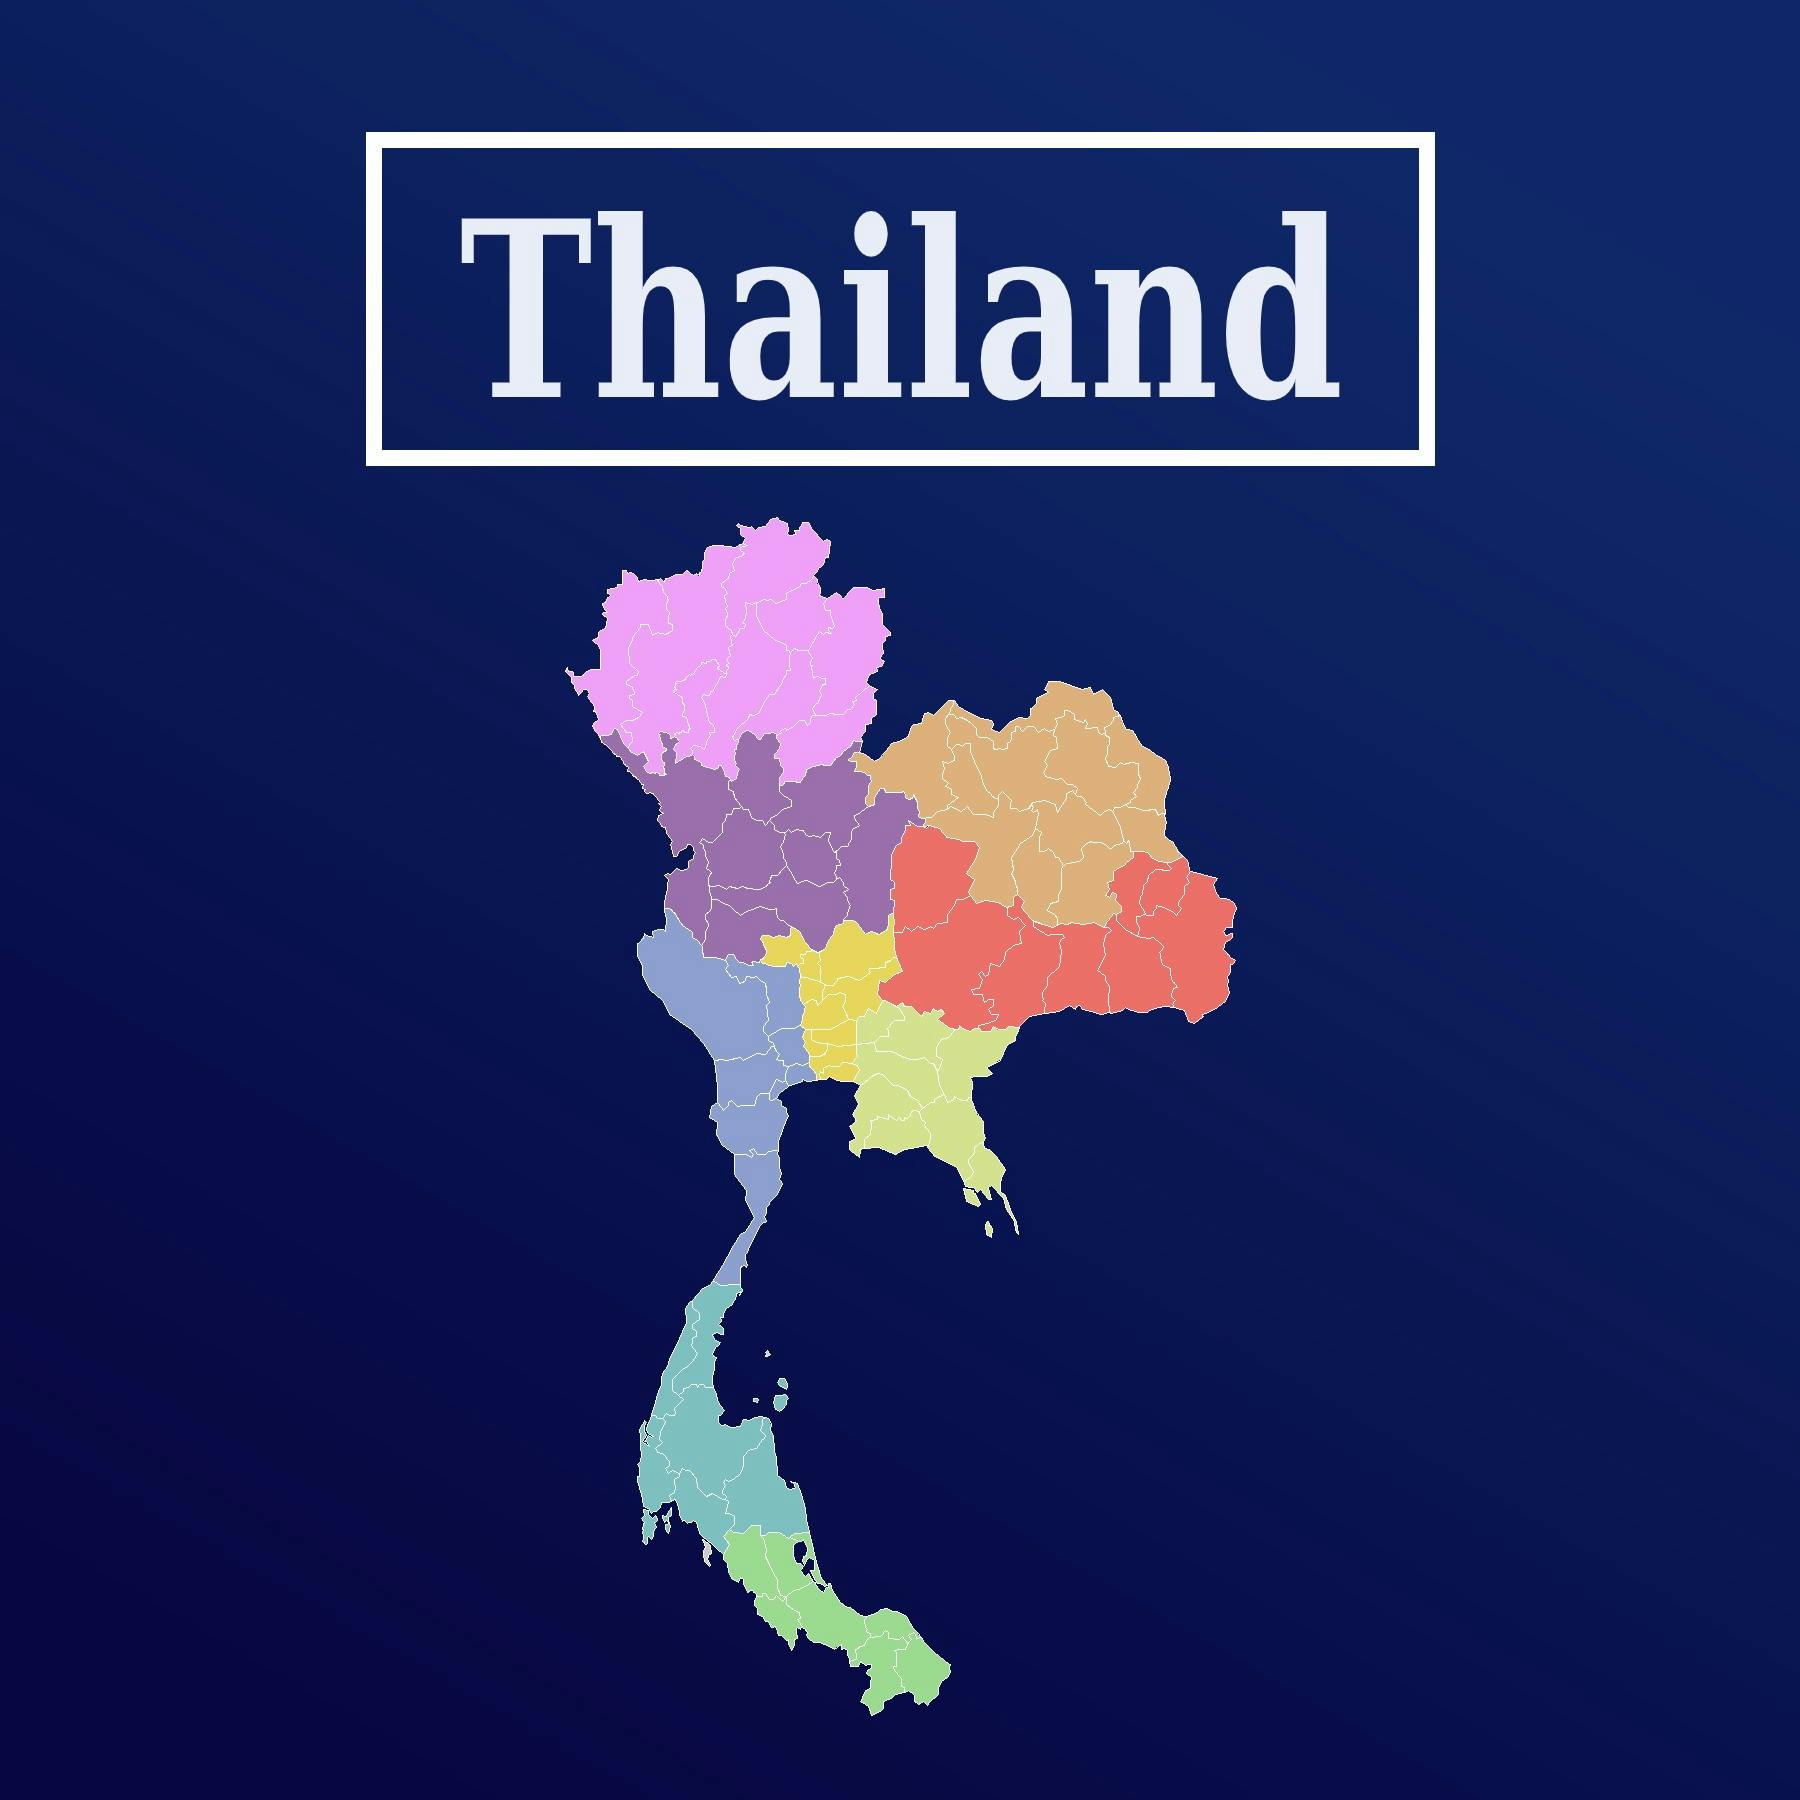 Episode 13: Thailand Expand and Export